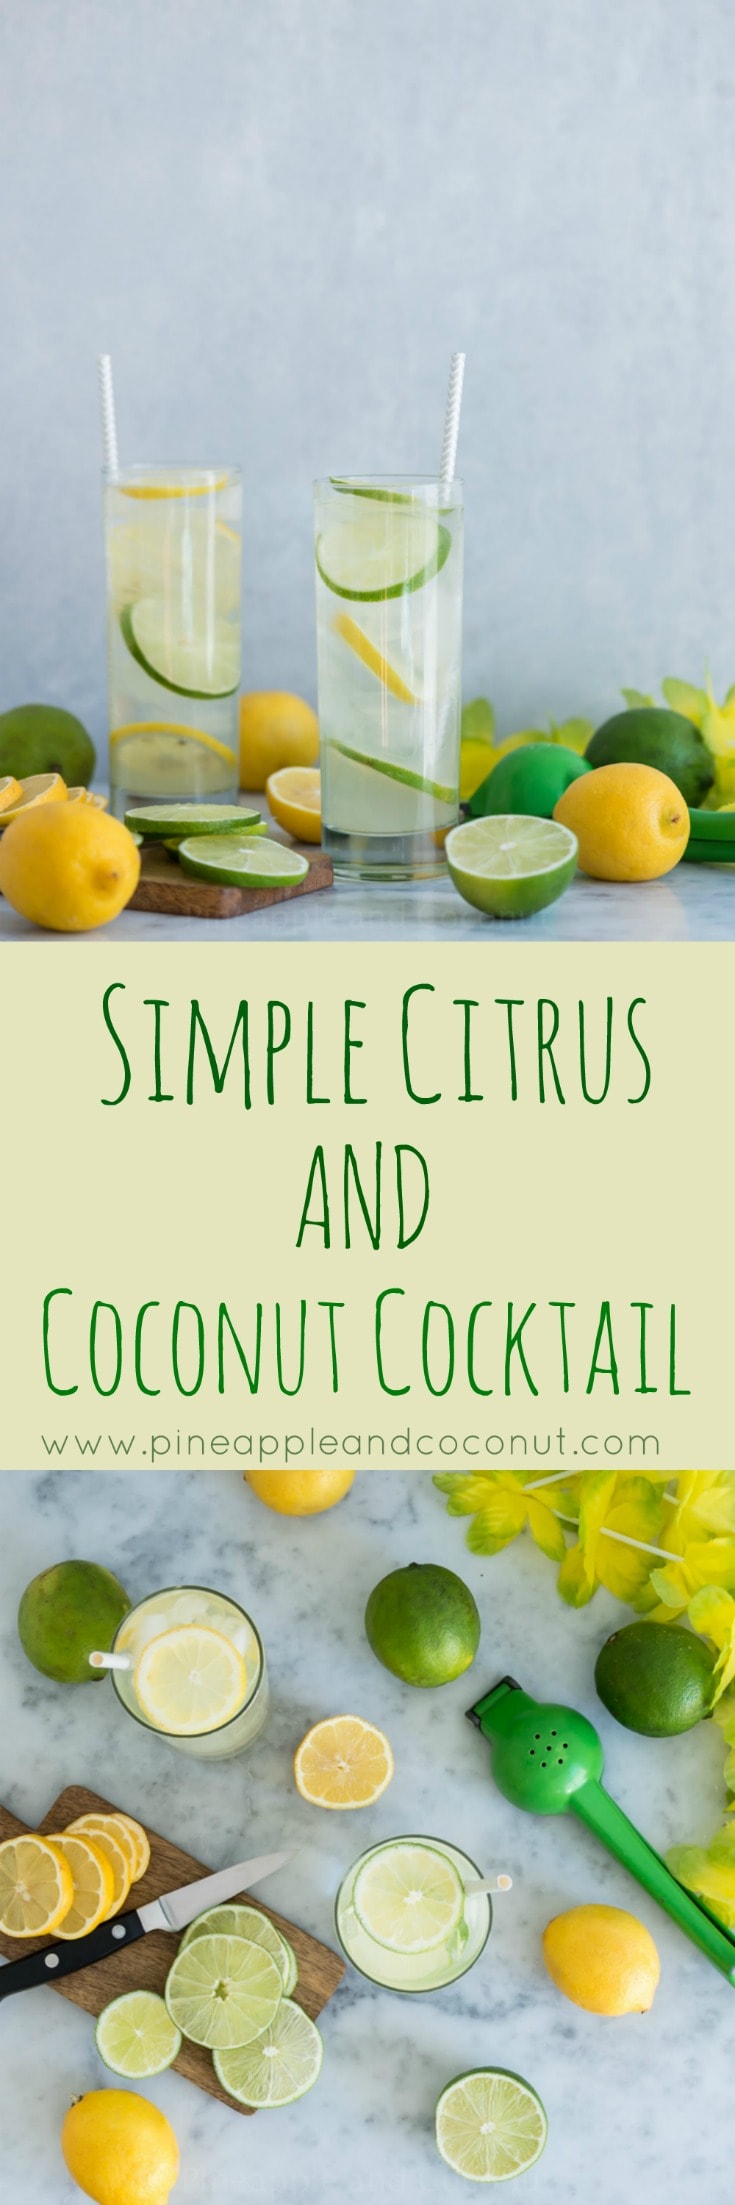 Simple Citrus and Coconut Cocktail Collage